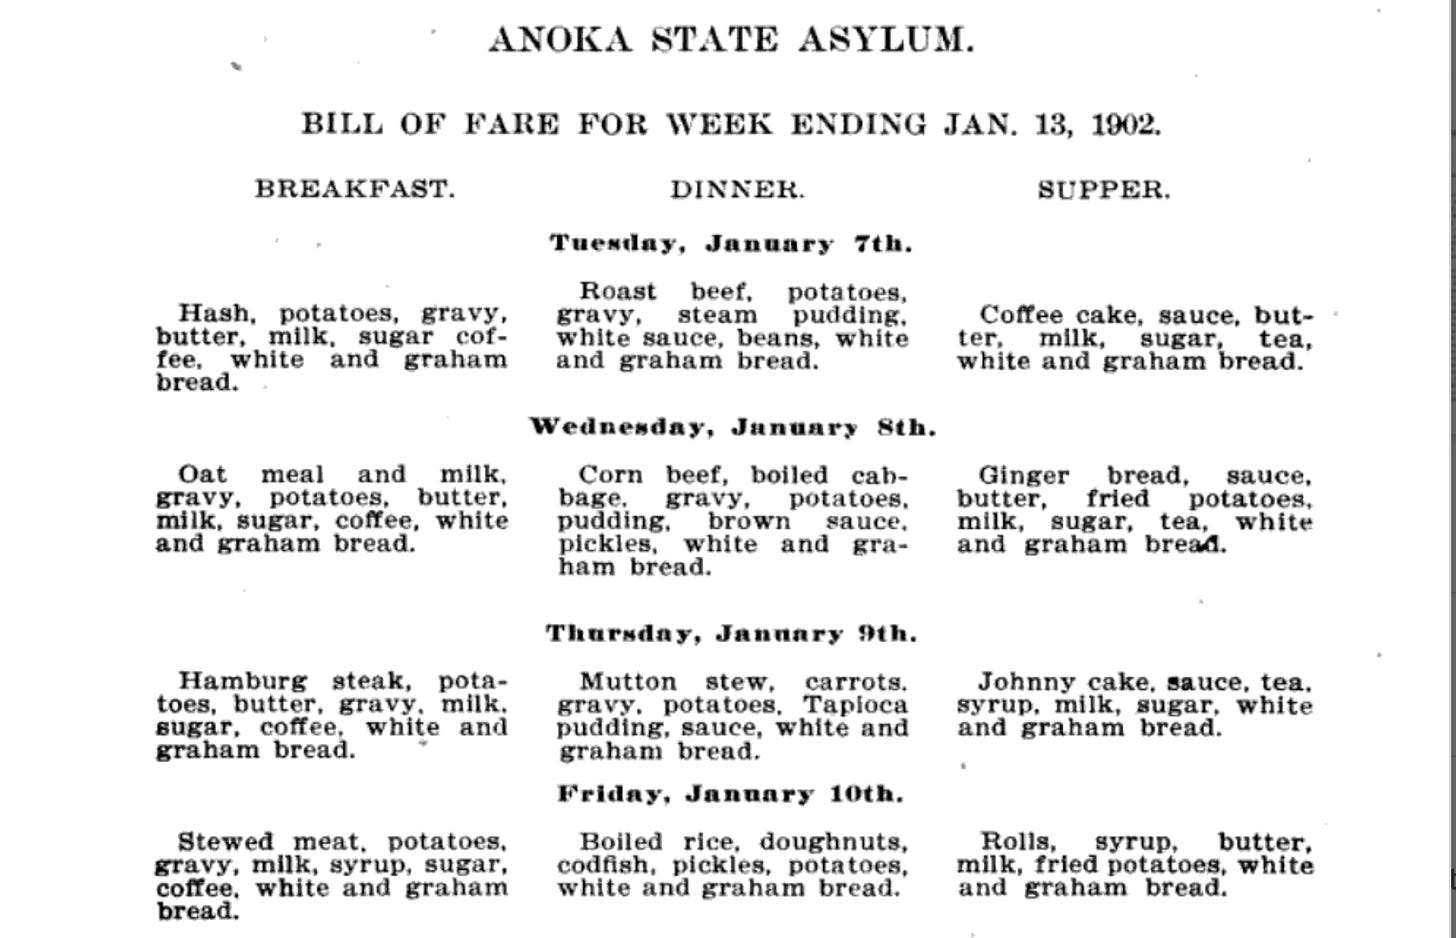 The Anoka State Asylum bill of fare for January 13, 1902. Lists meals including "hash, potatoes, gravy, butter," etc. 